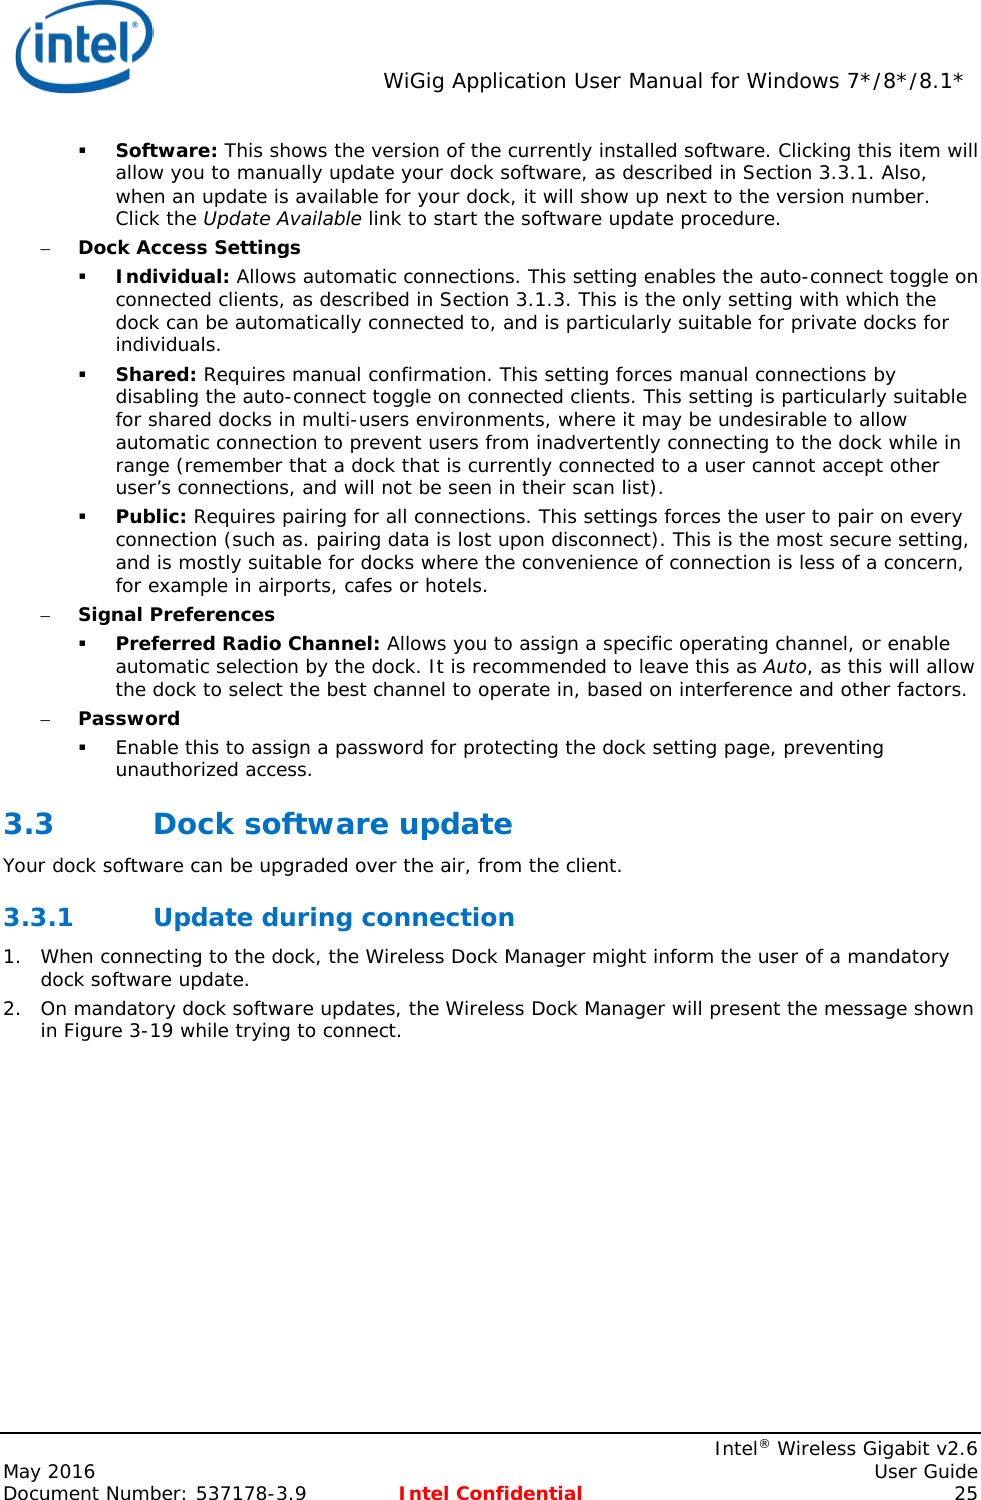  WiGig Application User Manual for Windows 7*/8*/8.1*    Intel® Wireless Gigabit v2.6 May 2016    User Guide Document Number: 537178-3.9 Intel Confidential 25  Software: This shows the version of the currently installed software. Clicking this item will allow you to manually update your dock software, as described in Section 3.3.1. Also, when an update is available for your dock, it will show up next to the version number. Click the Update Available link to start the software update procedure. – Dock Access Settings  Individual: Allows automatic connections. This setting enables the auto-connect toggle on connected clients, as described in Section 3.1.3. This is the only setting with which the dock can be automatically connected to, and is particularly suitable for private docks for individuals.  Shared: Requires manual confirmation. This setting forces manual connections by disabling the auto-connect toggle on connected clients. This setting is particularly suitable for shared docks in multi-users environments, where it may be undesirable to allow automatic connection to prevent users from inadvertently connecting to the dock while in range (remember that a dock that is currently connected to a user cannot accept other user’s connections, and will not be seen in their scan list).  Public: Requires pairing for all connections. This settings forces the user to pair on every connection (such as. pairing data is lost upon disconnect). This is the most secure setting, and is mostly suitable for docks where the convenience of connection is less of a concern, for example in airports, cafes or hotels. – Signal Preferences  Preferred Radio Channel: Allows you to assign a specific operating channel, or enable automatic selection by the dock. It is recommended to leave this as Auto, as this will allow the dock to select the best channel to operate in, based on interference and other factors. – Password  Enable this to assign a password for protecting the dock setting page, preventing unauthorized access. 3.3 Dock software update Your dock software can be upgraded over the air, from the client. 3.3.1 Update during connection 1. When connecting to the dock, the Wireless Dock Manager might inform the user of a mandatory dock software update. 2. On mandatory dock software updates, the Wireless Dock Manager will present the message shown in Figure 3-19 while trying to connect. 